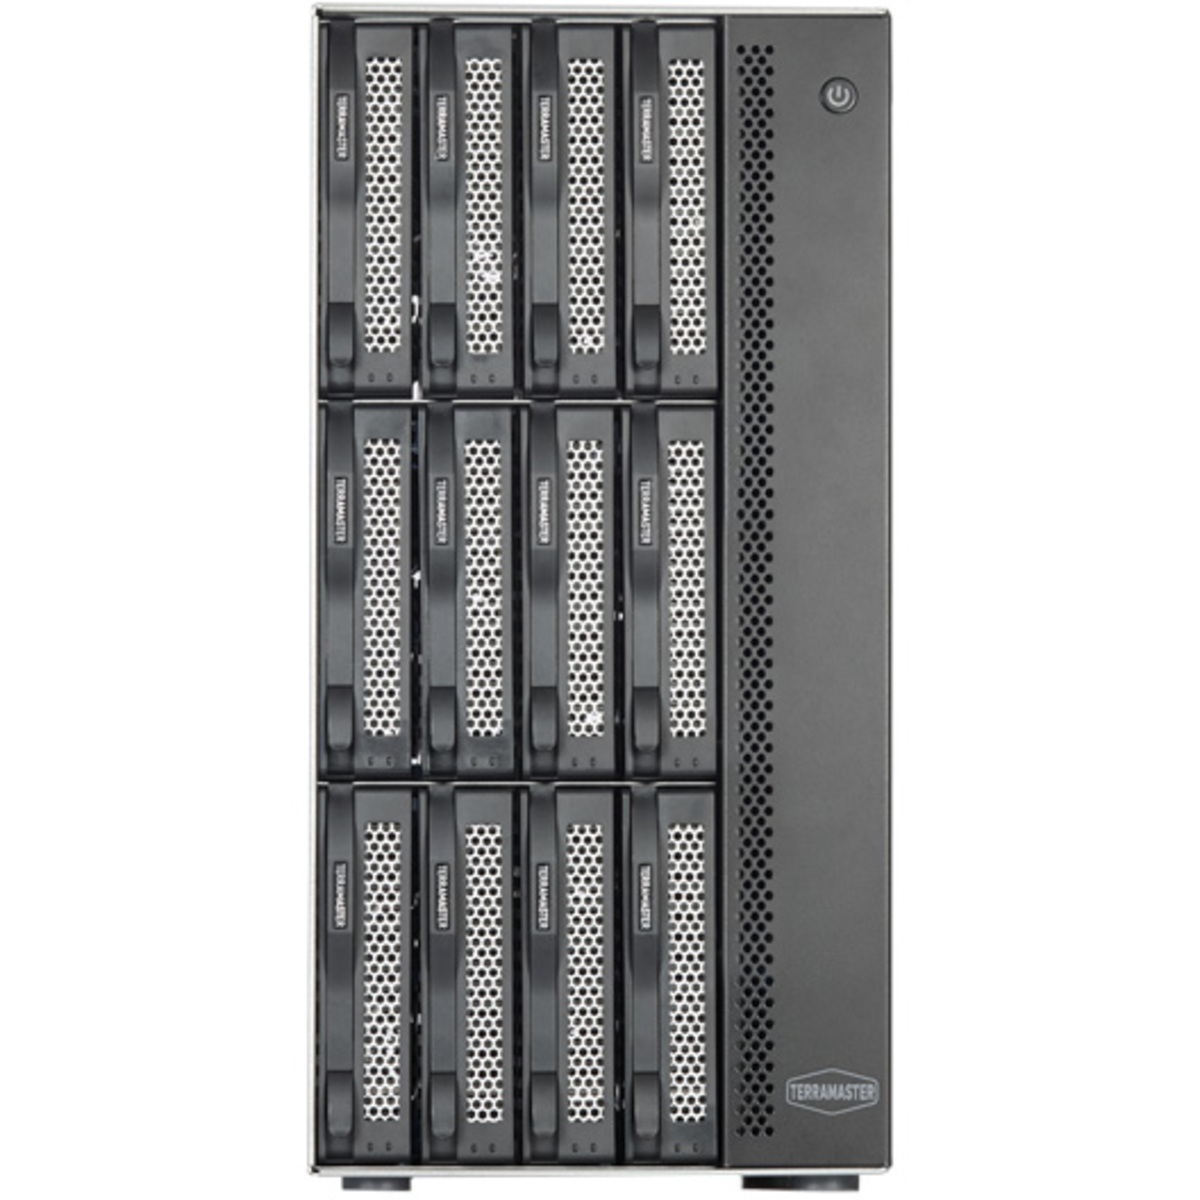 TerraMaster T12-450 22tb 12-Bay Desktop Multimedia / Power User / Business NAS - Network Attached Storage Device 11x2tb Samsung 870 QVO MZ-77Q2T0 2.5 560/530MB/s SATA 6Gb/s SSD CONSUMER Class Drives Installed - Burn-In Tested T12-450